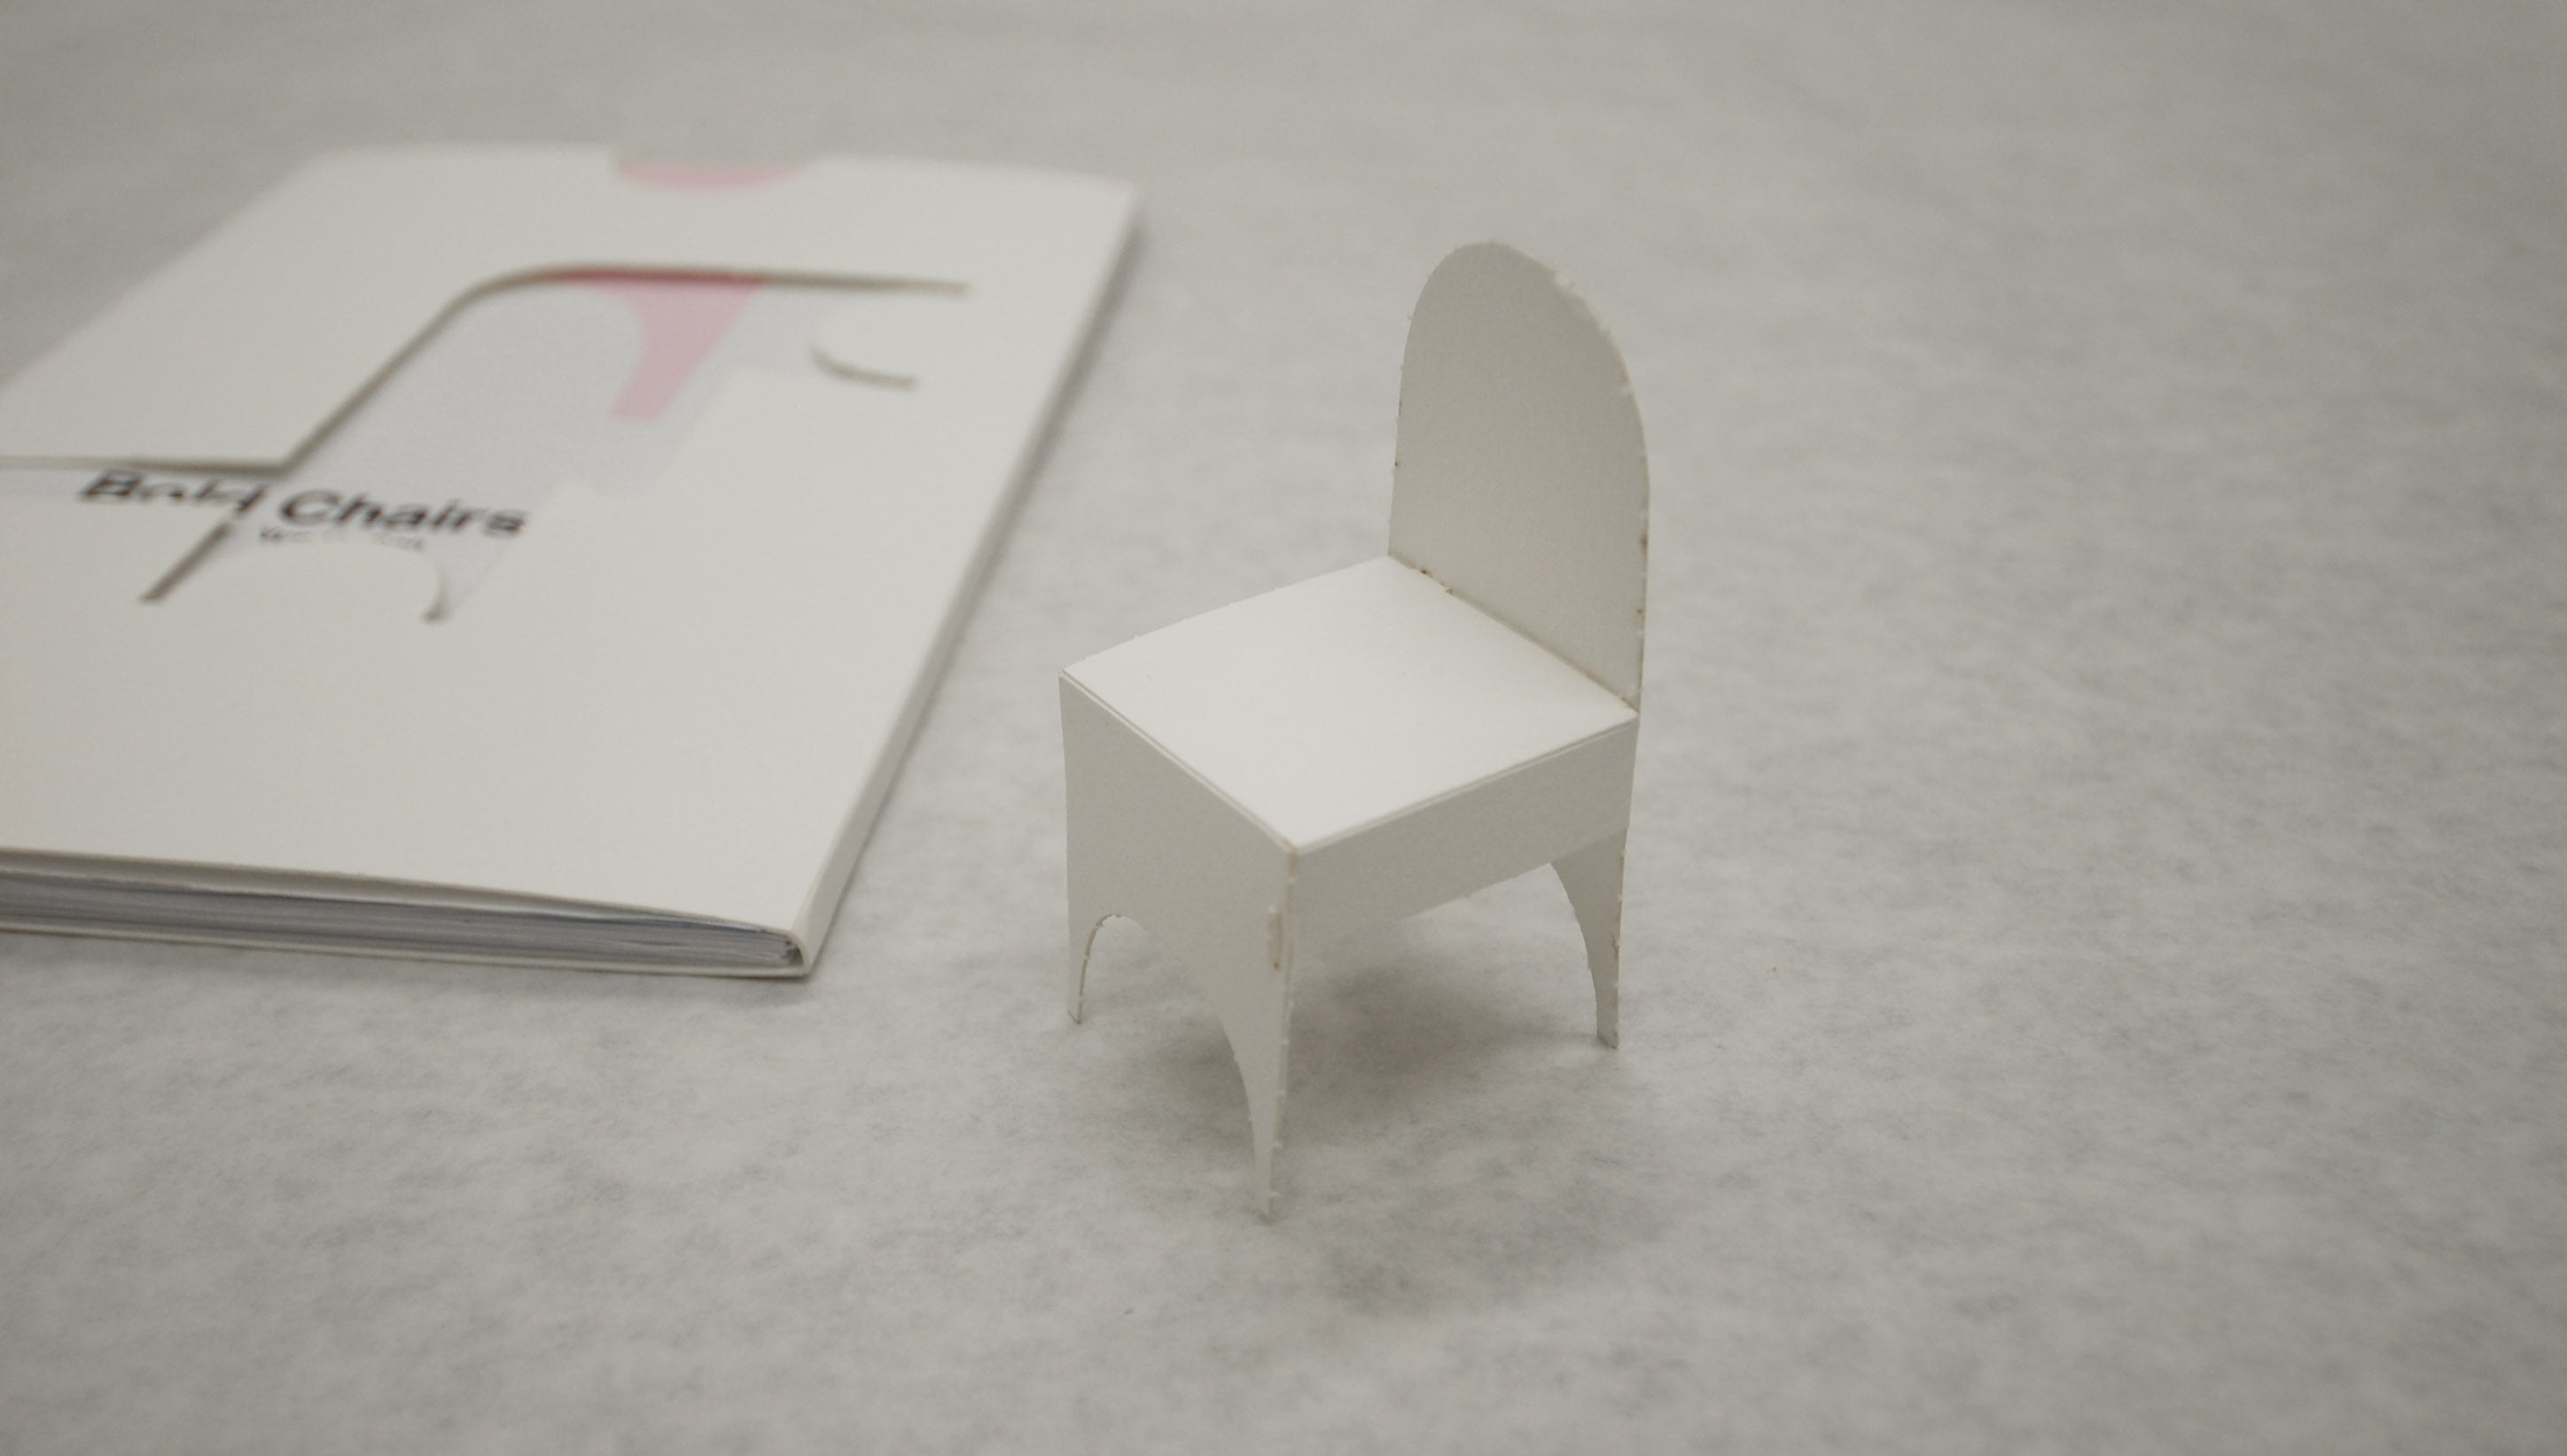 View of a folder chair created from the cover sleeve cutout.